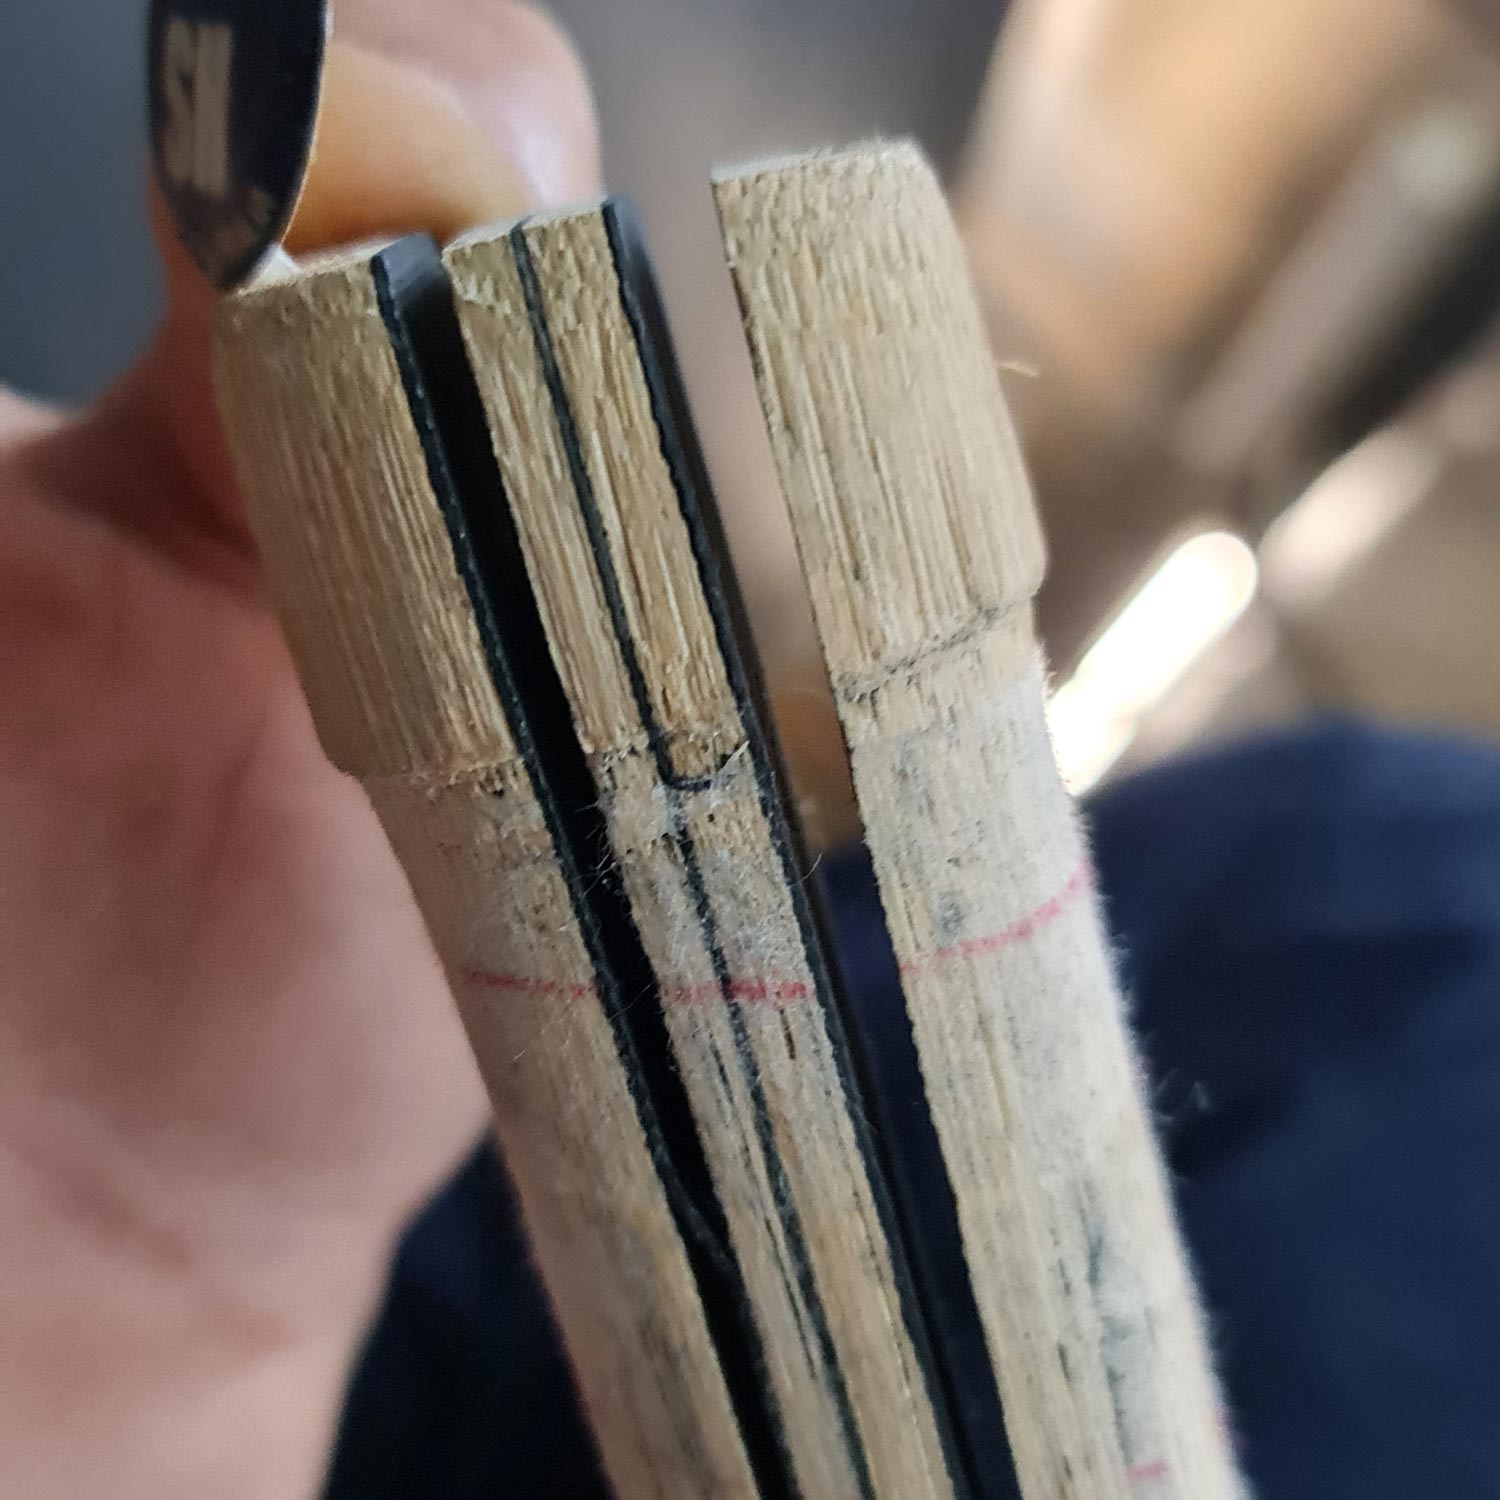 Cooper Cricket - the face of my bat is cracking